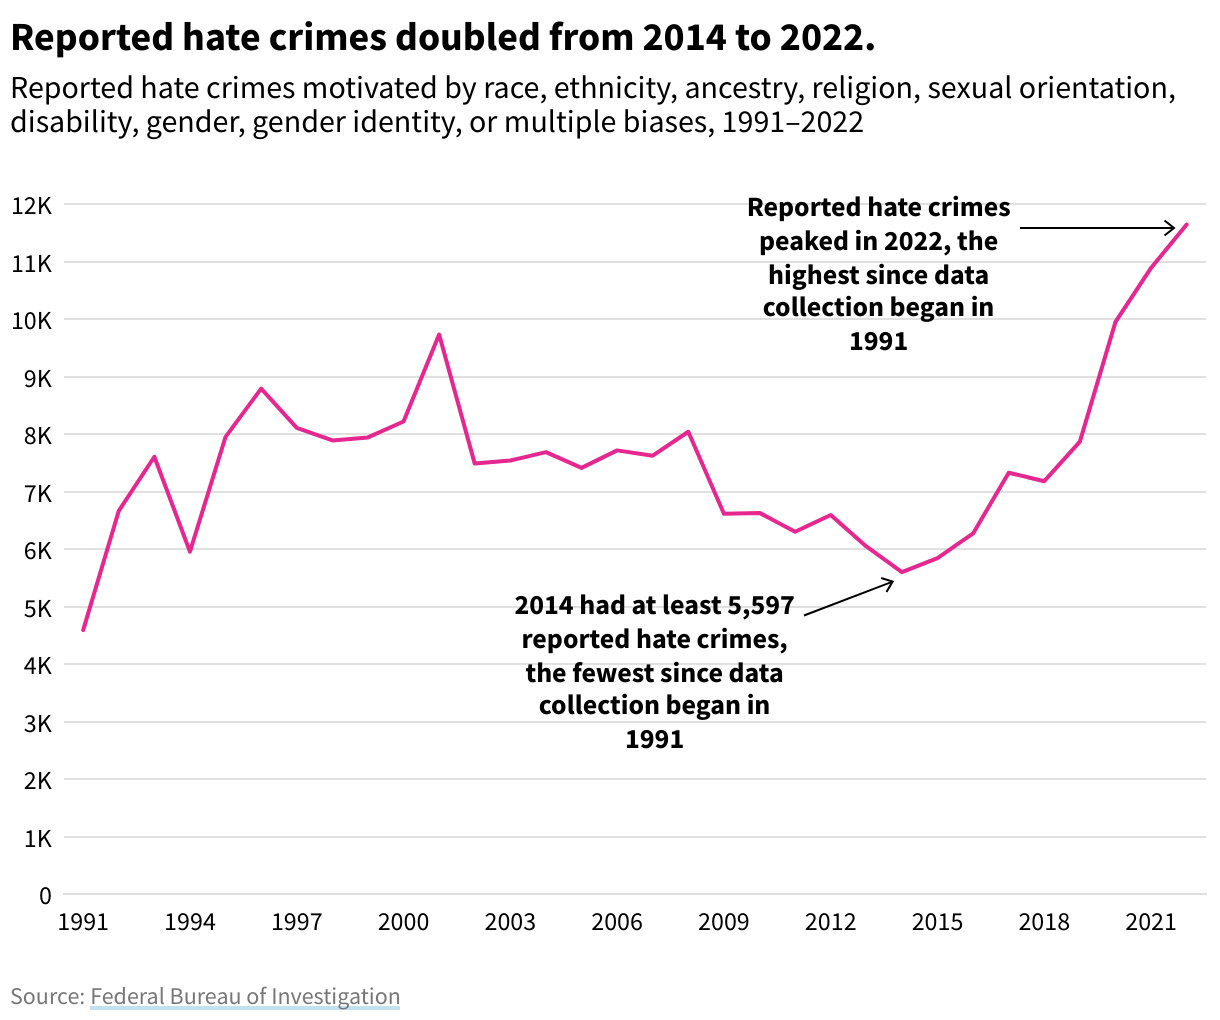 A line chart showing the number of reported hate crimes from 1991 to 2022